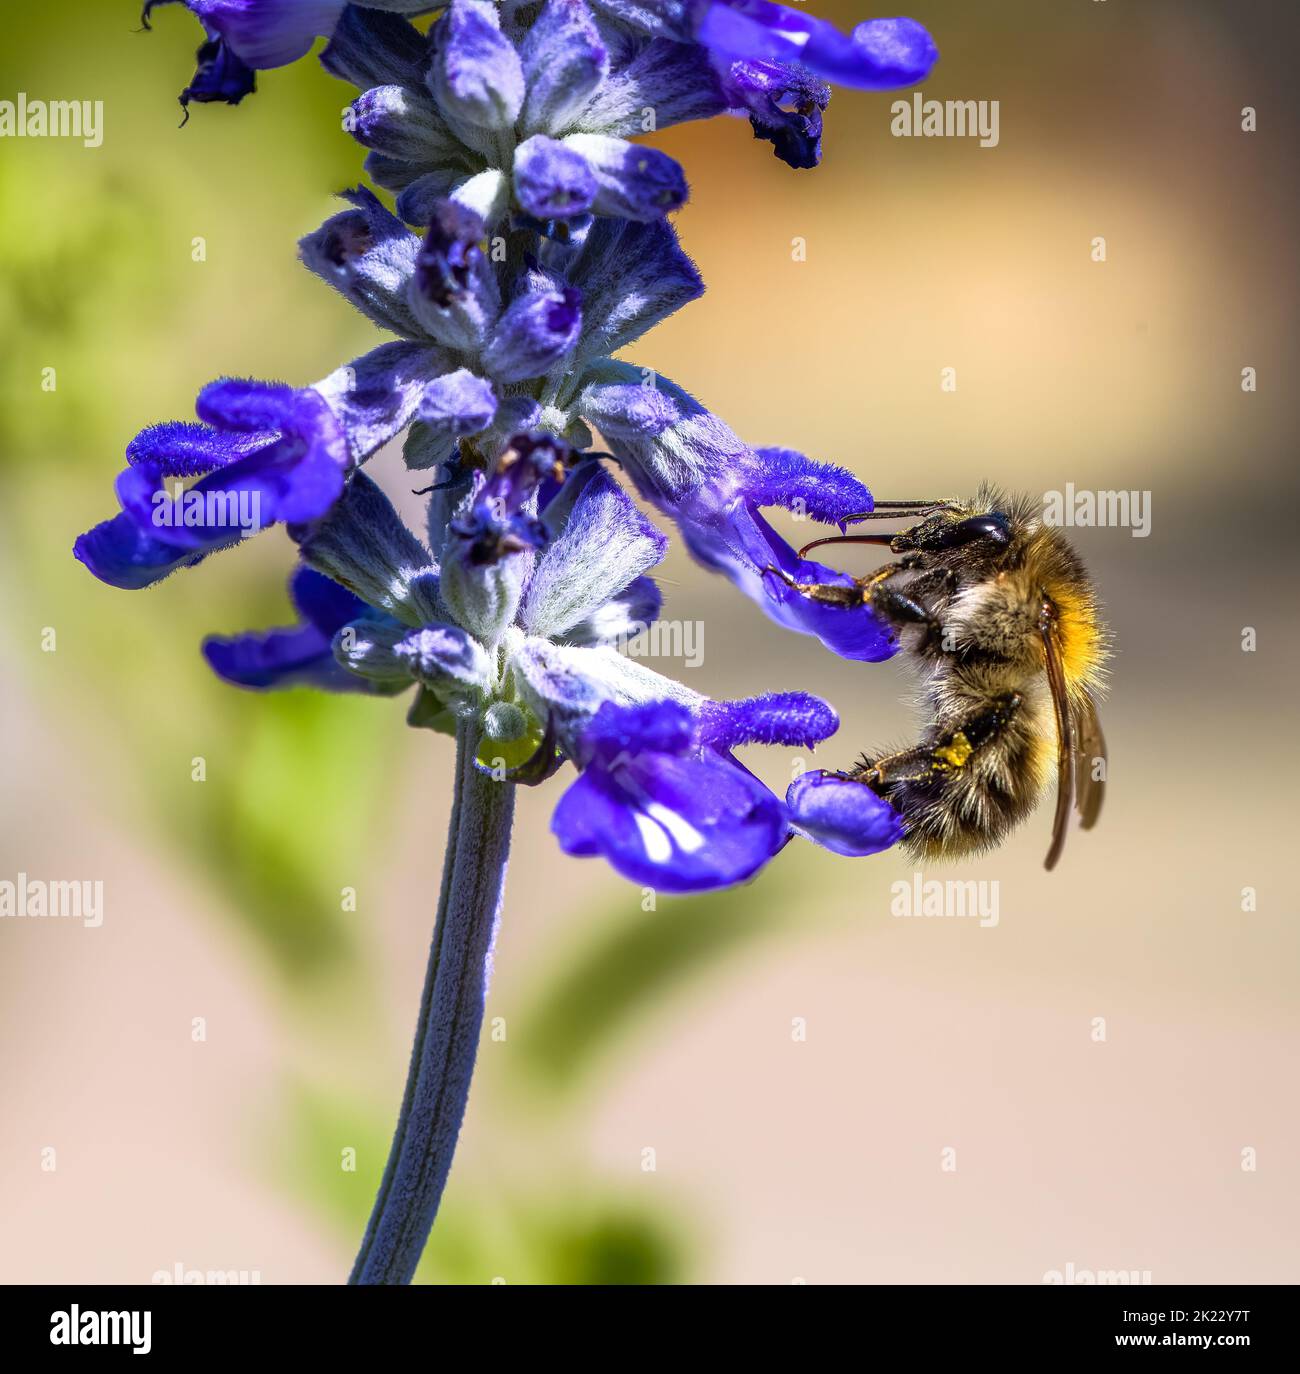 Macro of a common carder bee on a purple sage flower blossom Stock Photo